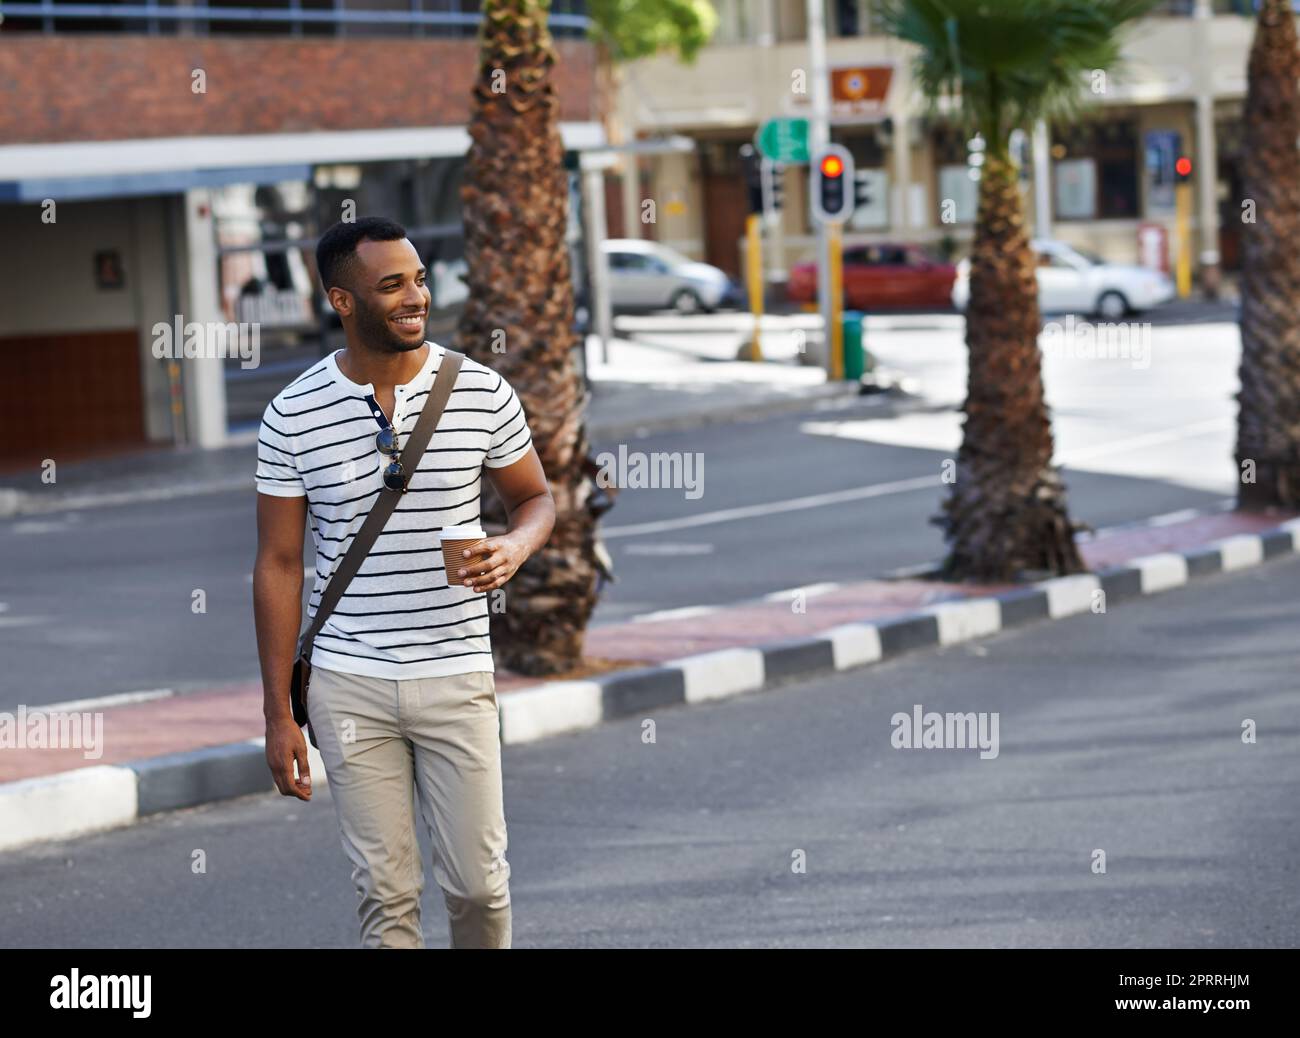 Loving the city vibe. A handsome african american businessman out in the city while on his way to work. Stock Photo